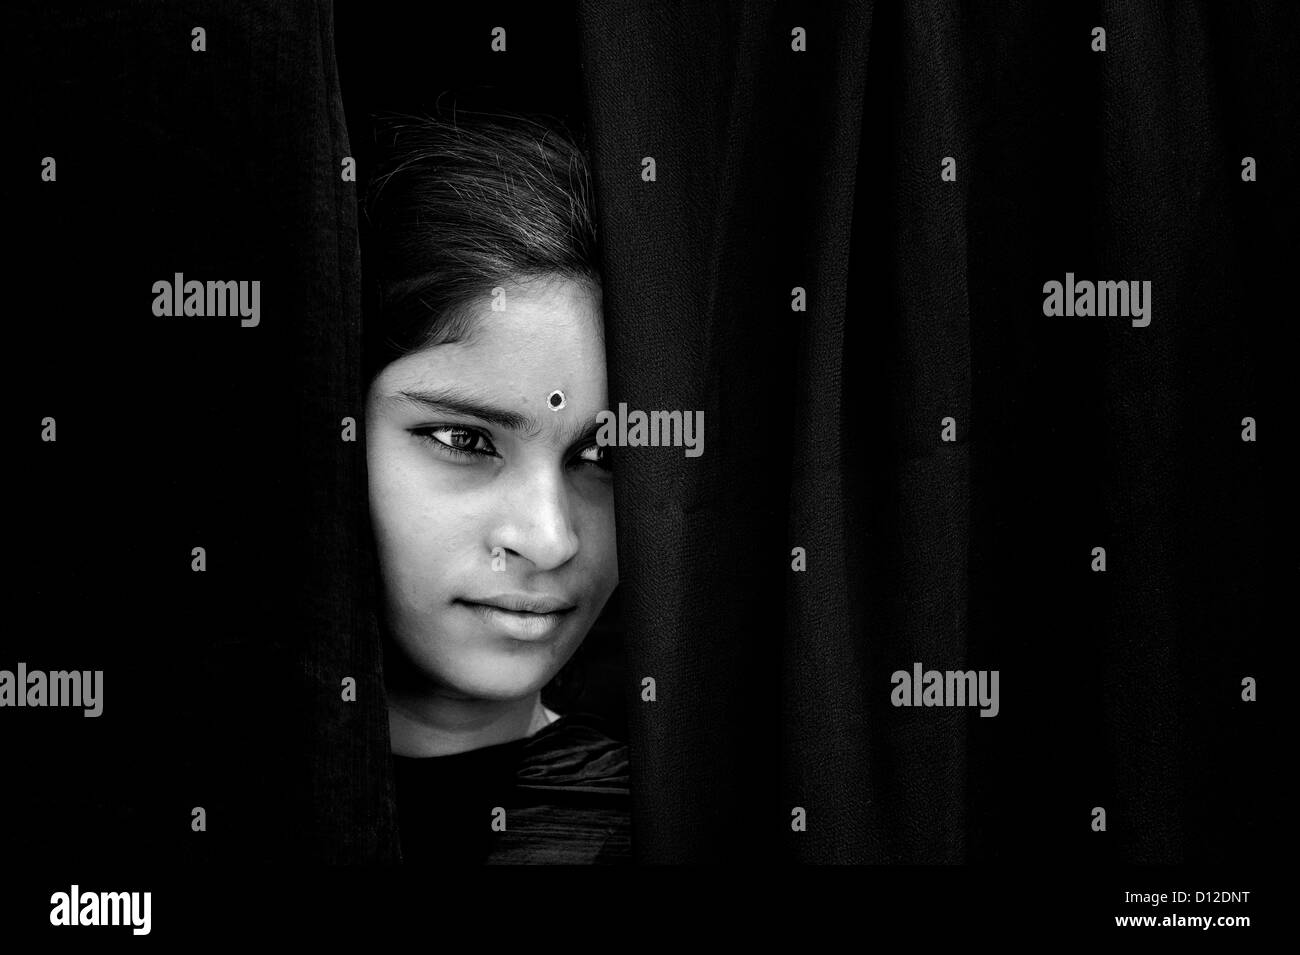 Indian girl face looking through dark shawls. India. Black and white Stock Photo